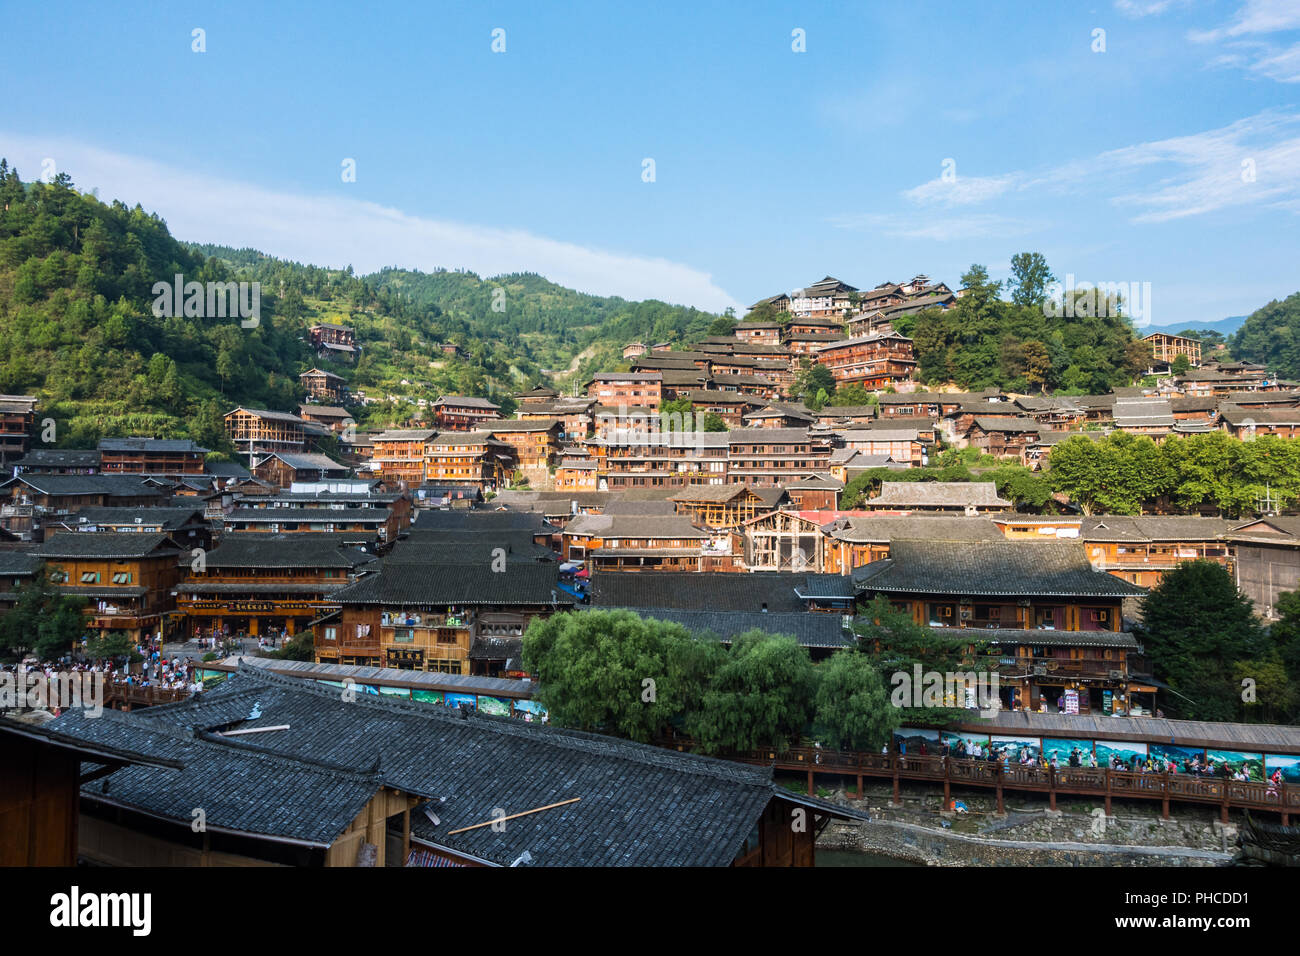 Qian Hu Miao Zhai Daytime Village Landscape, Ancient Chinese Cultural Location Stock Photo